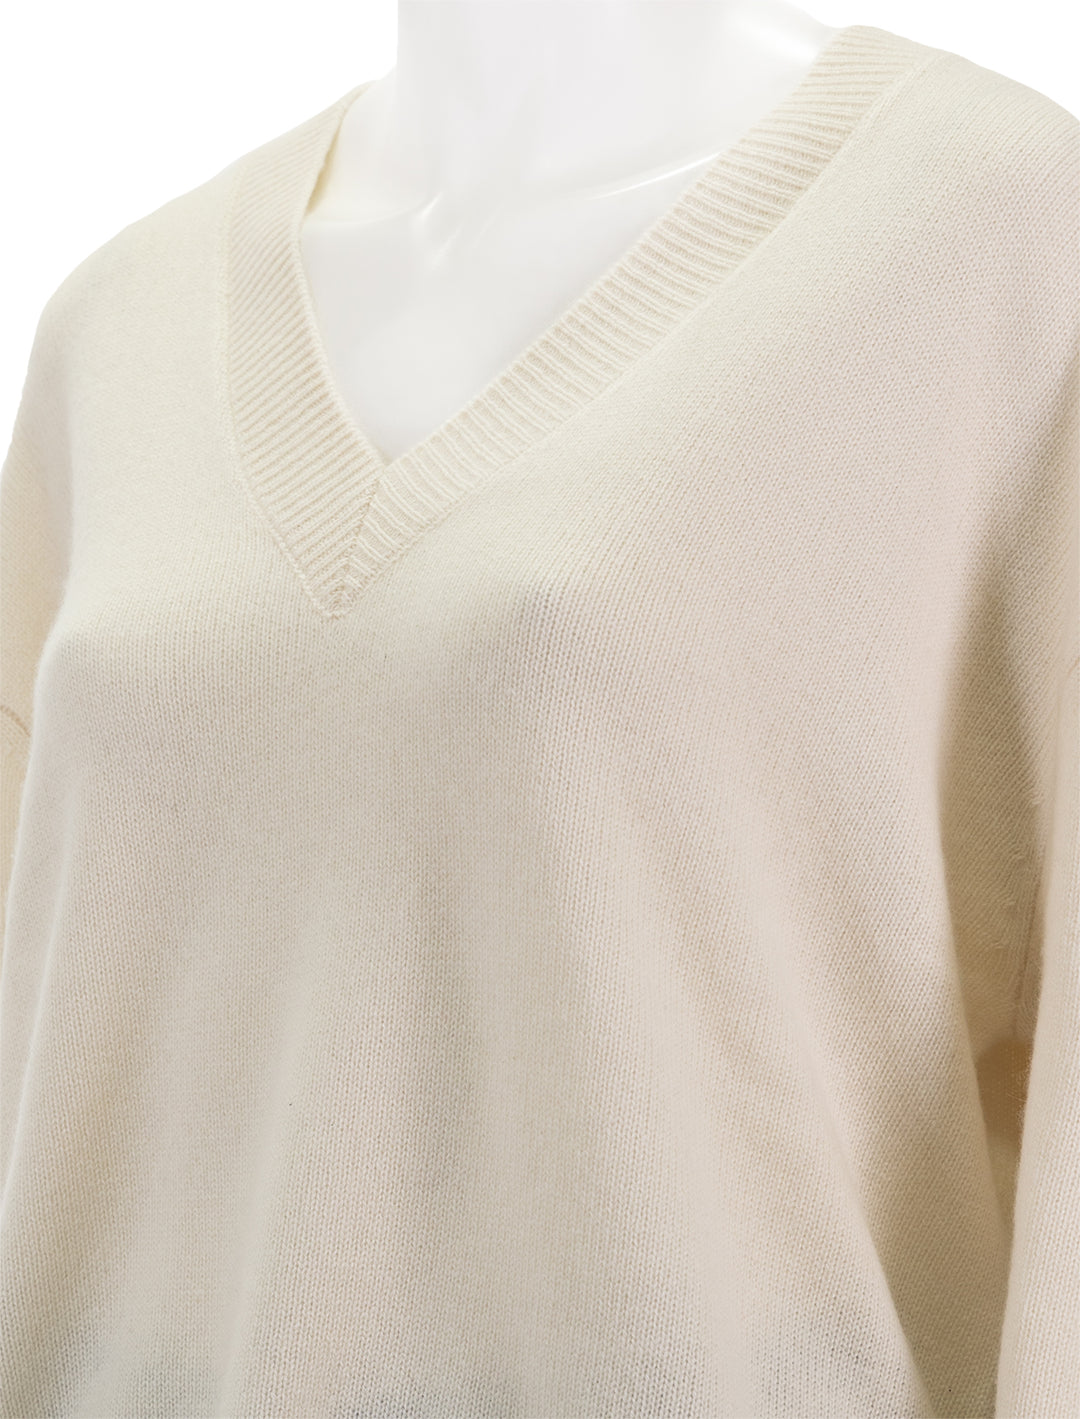 Close-up view of Anine Bing's lee sweater in ivory.